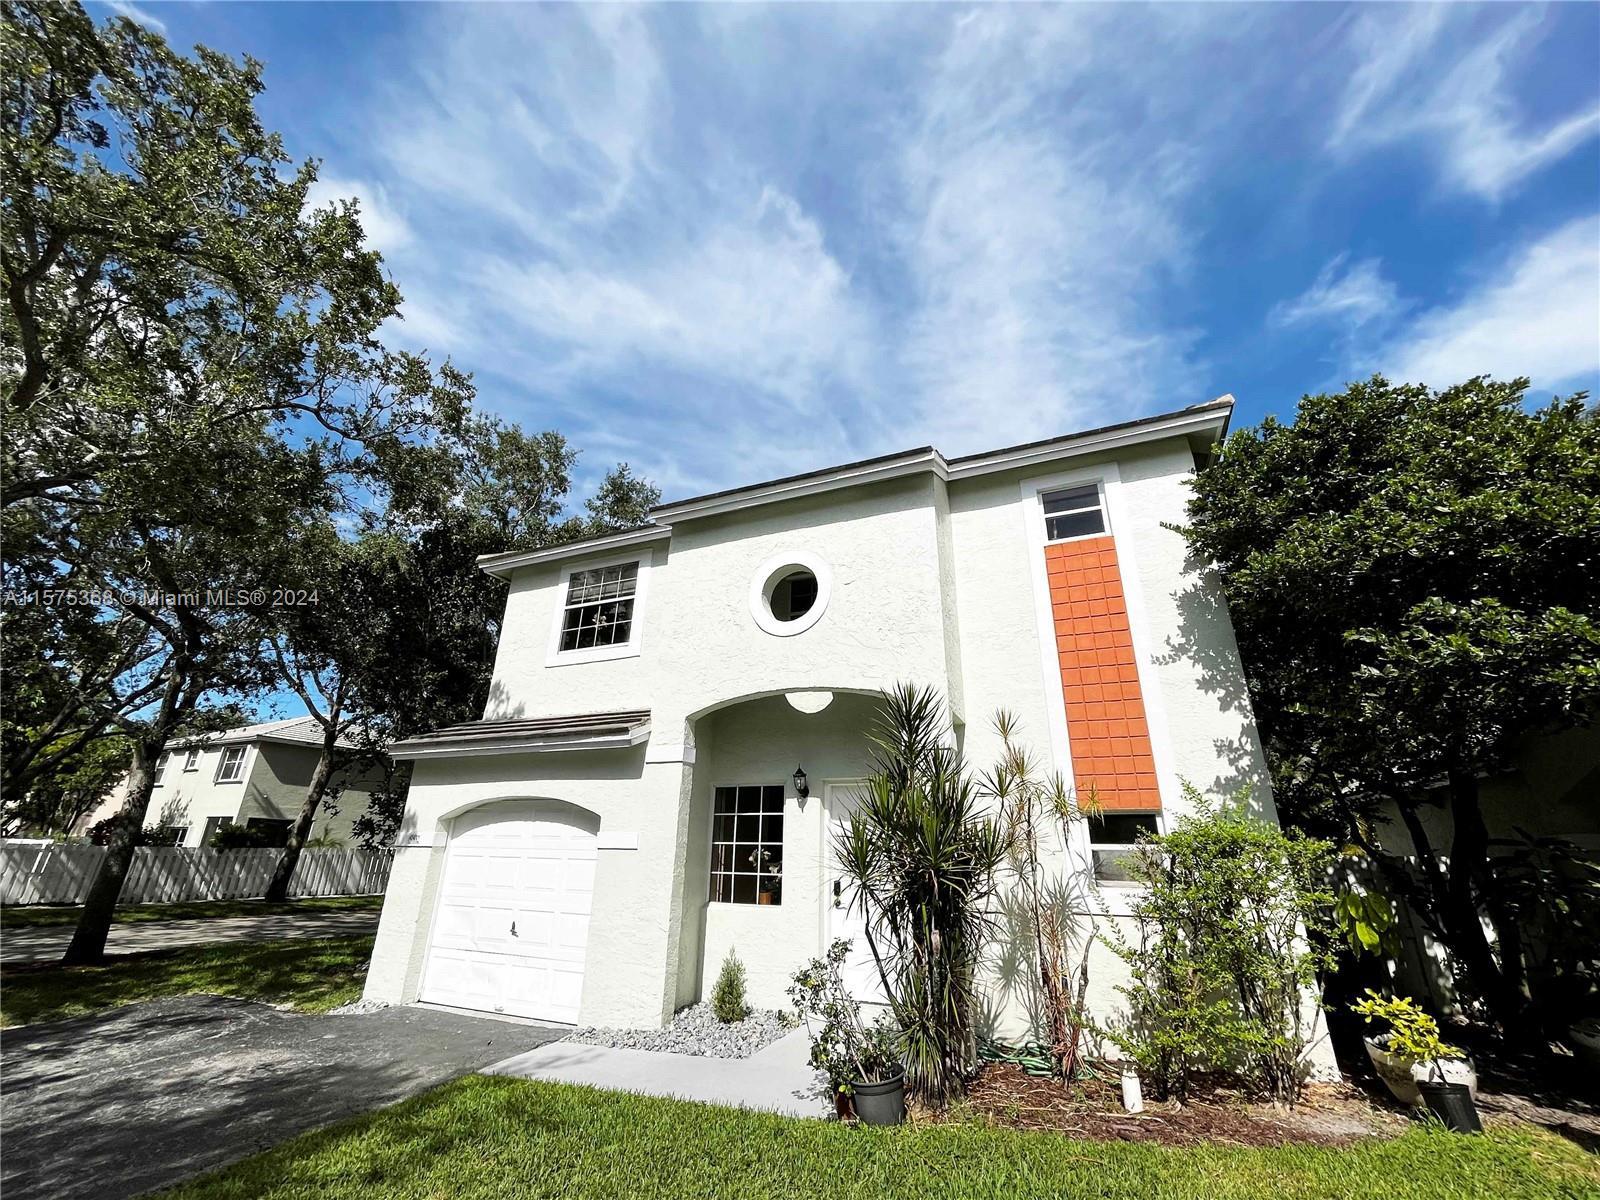 Photo of 9832 NW 9th Ct in Plantation, FL